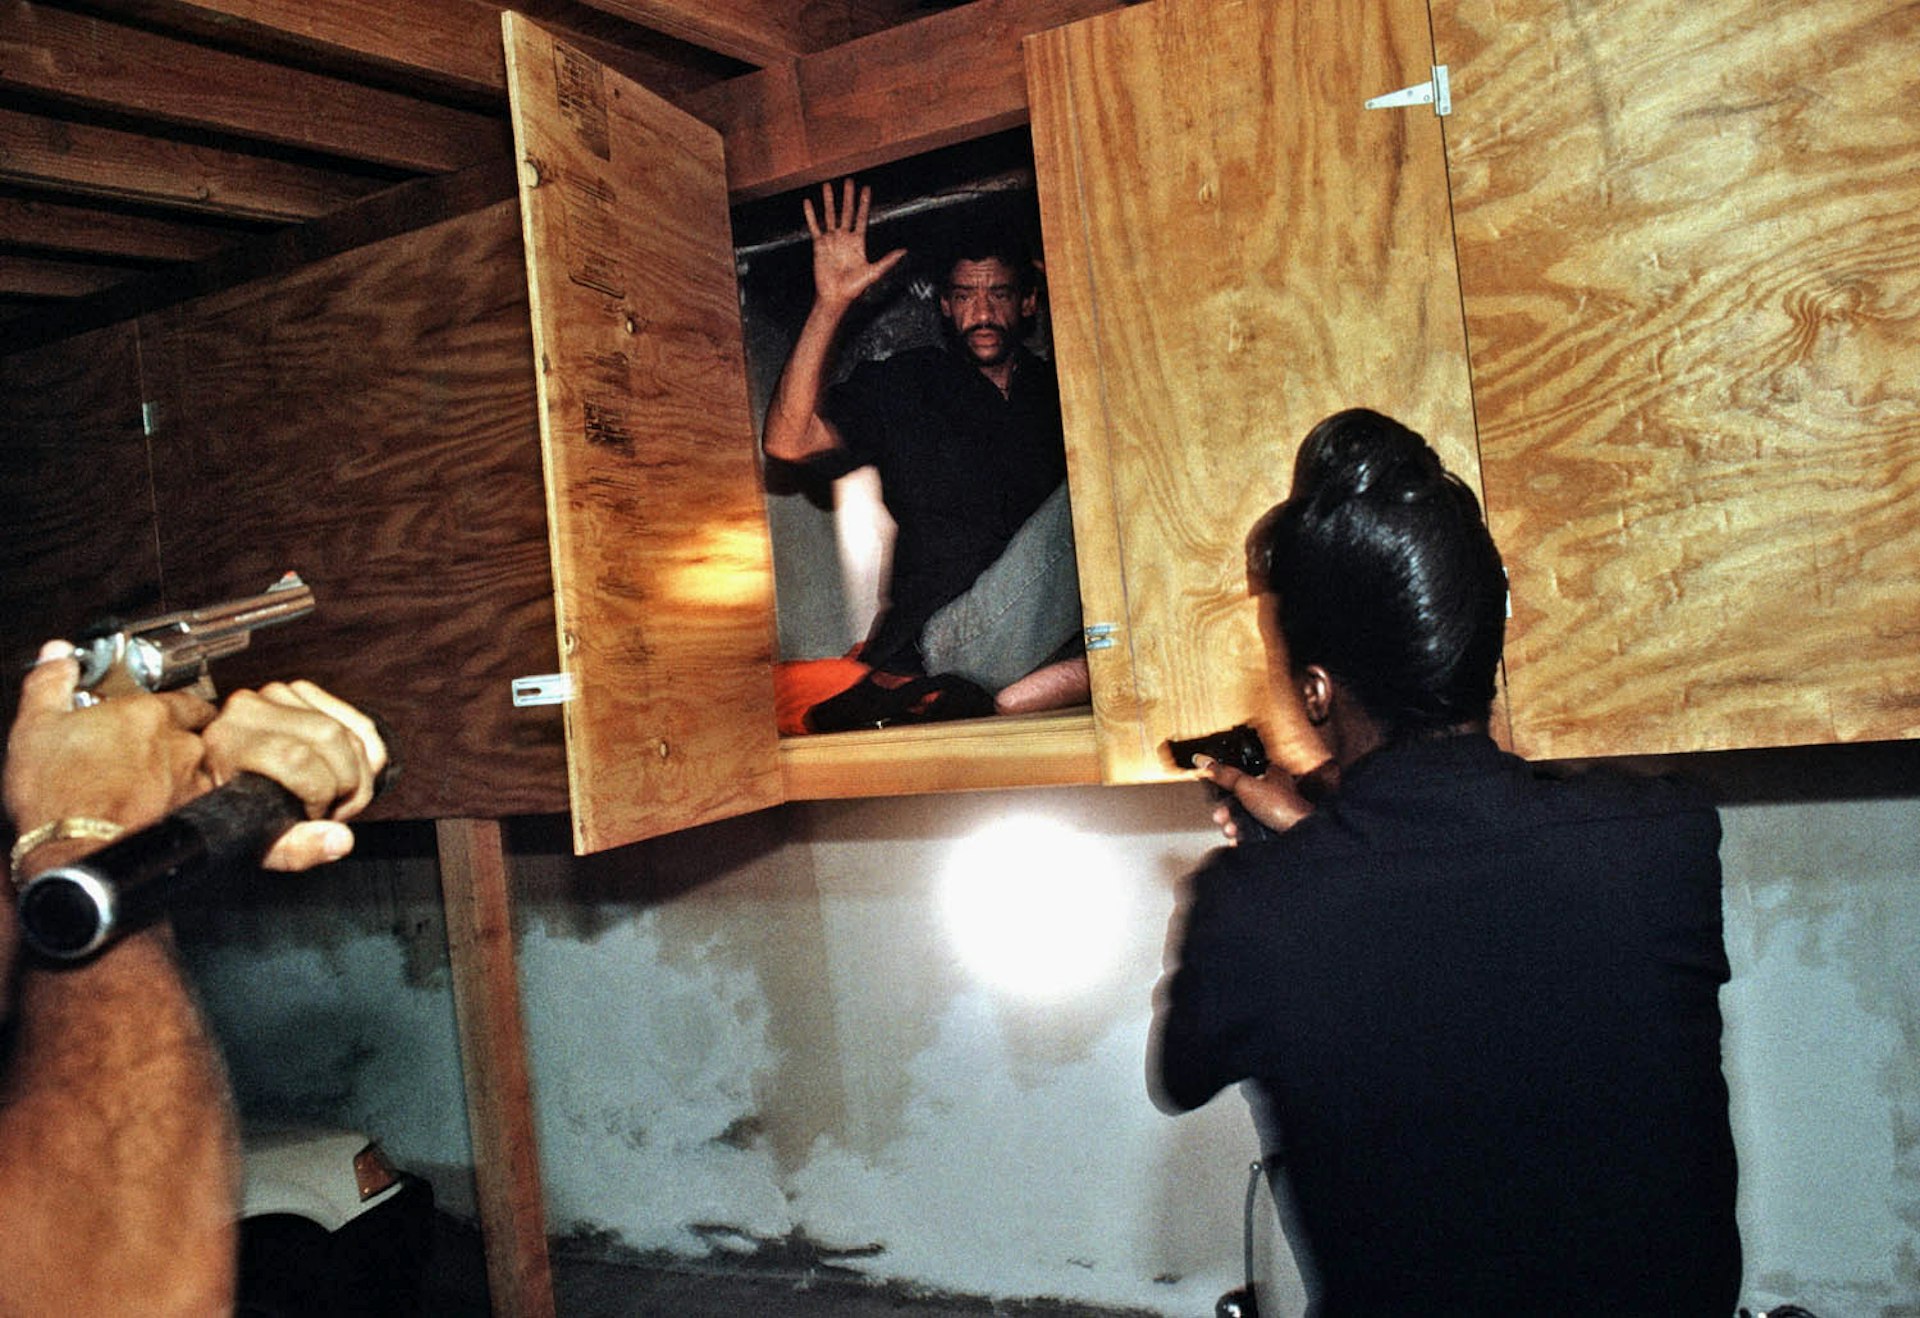 A gripping portrait of the LAPD in the 1990s